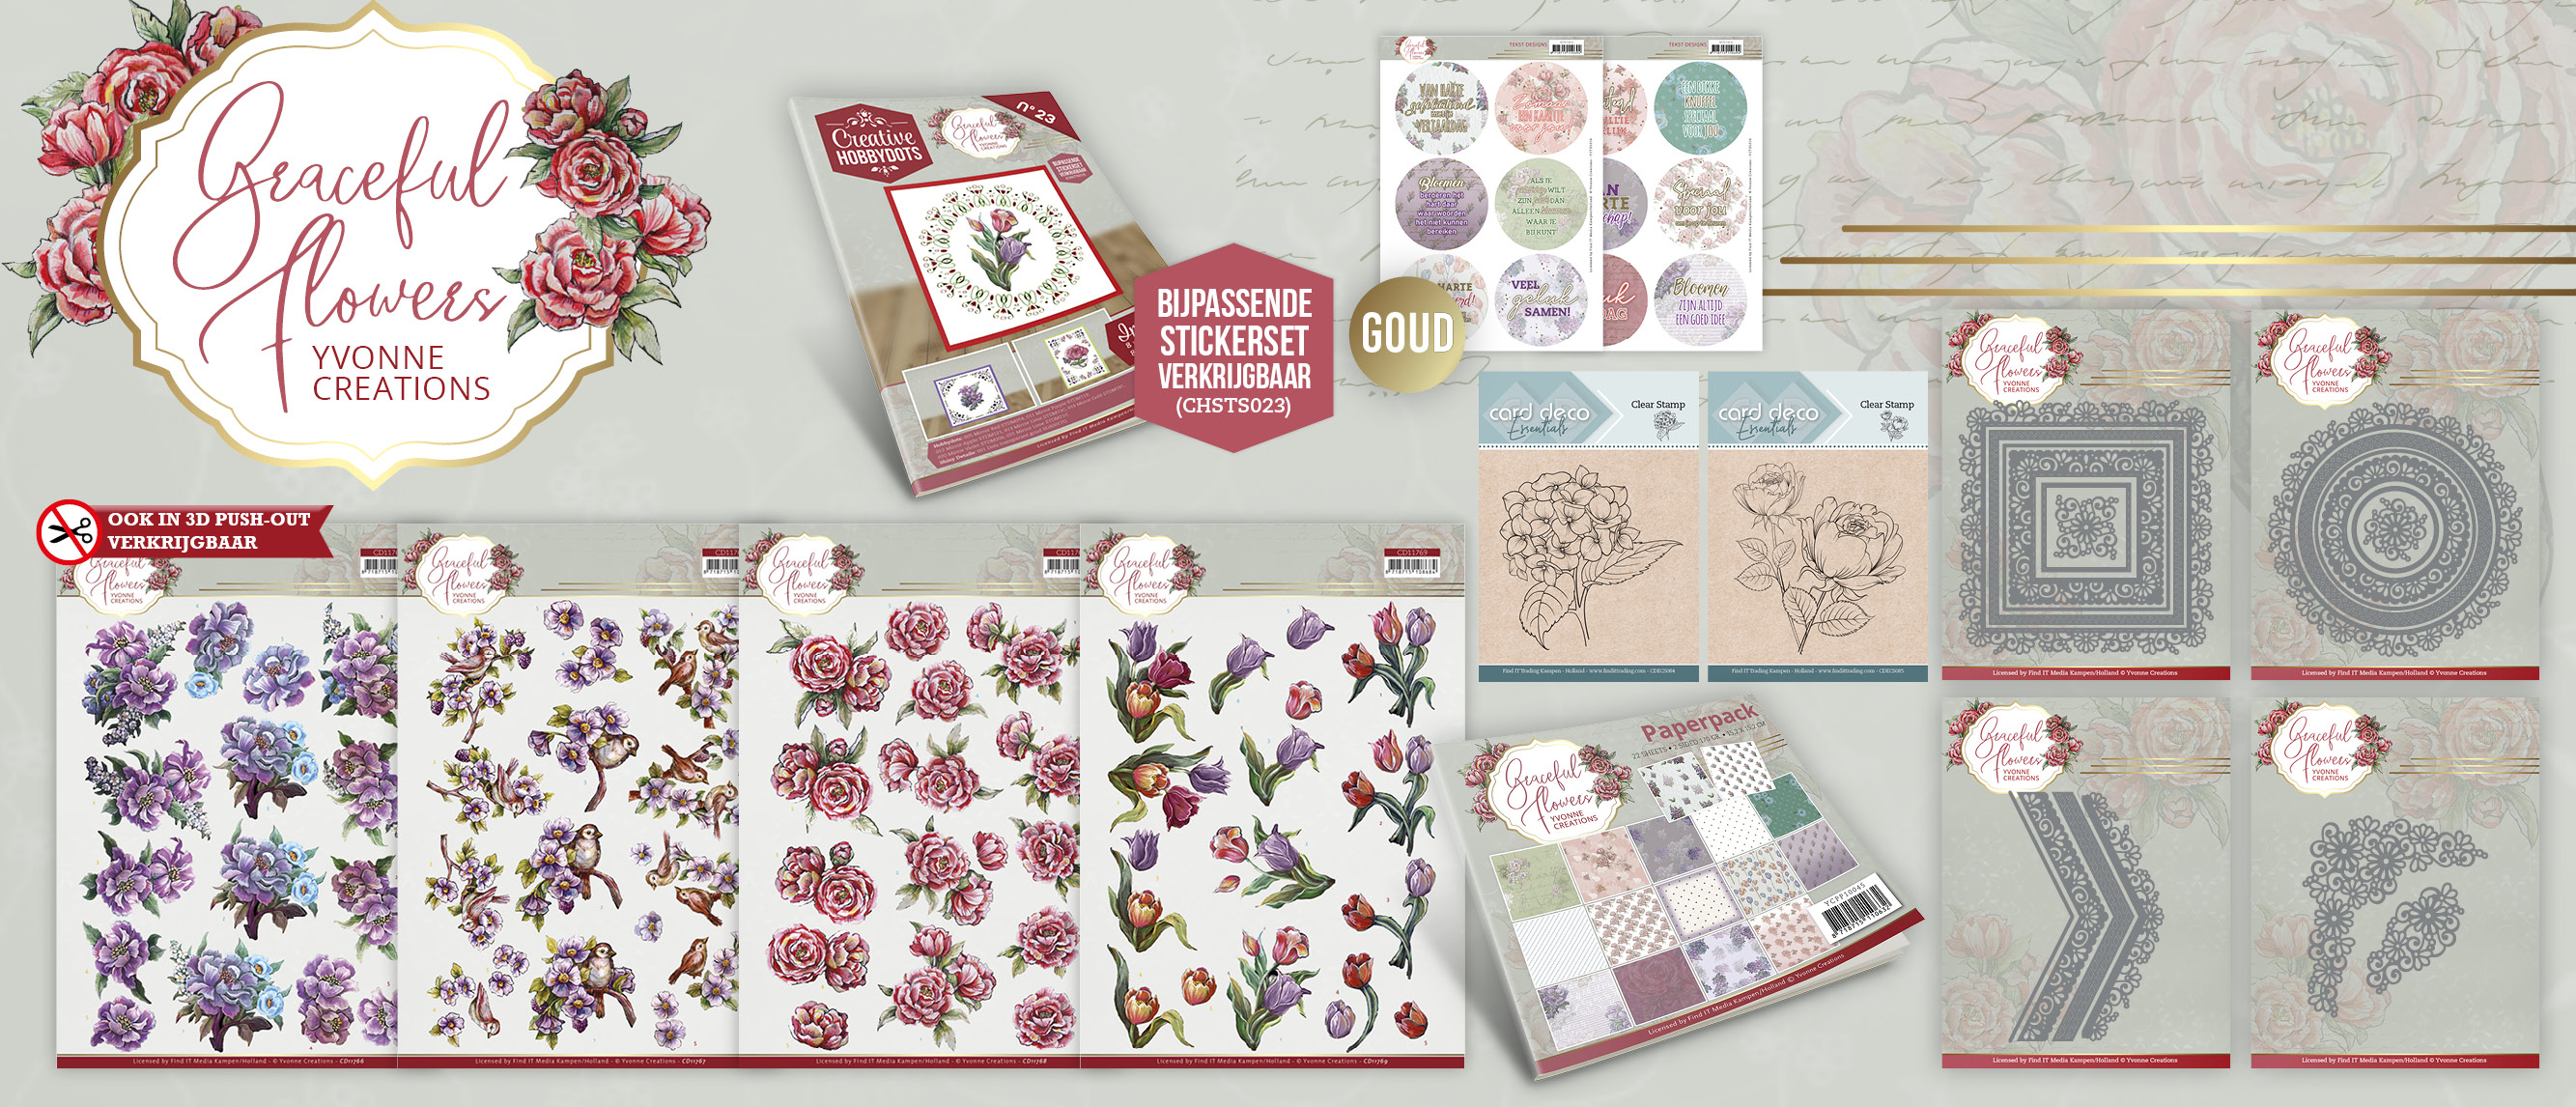 Collectie Graceful Flowers – Yvonne Creations